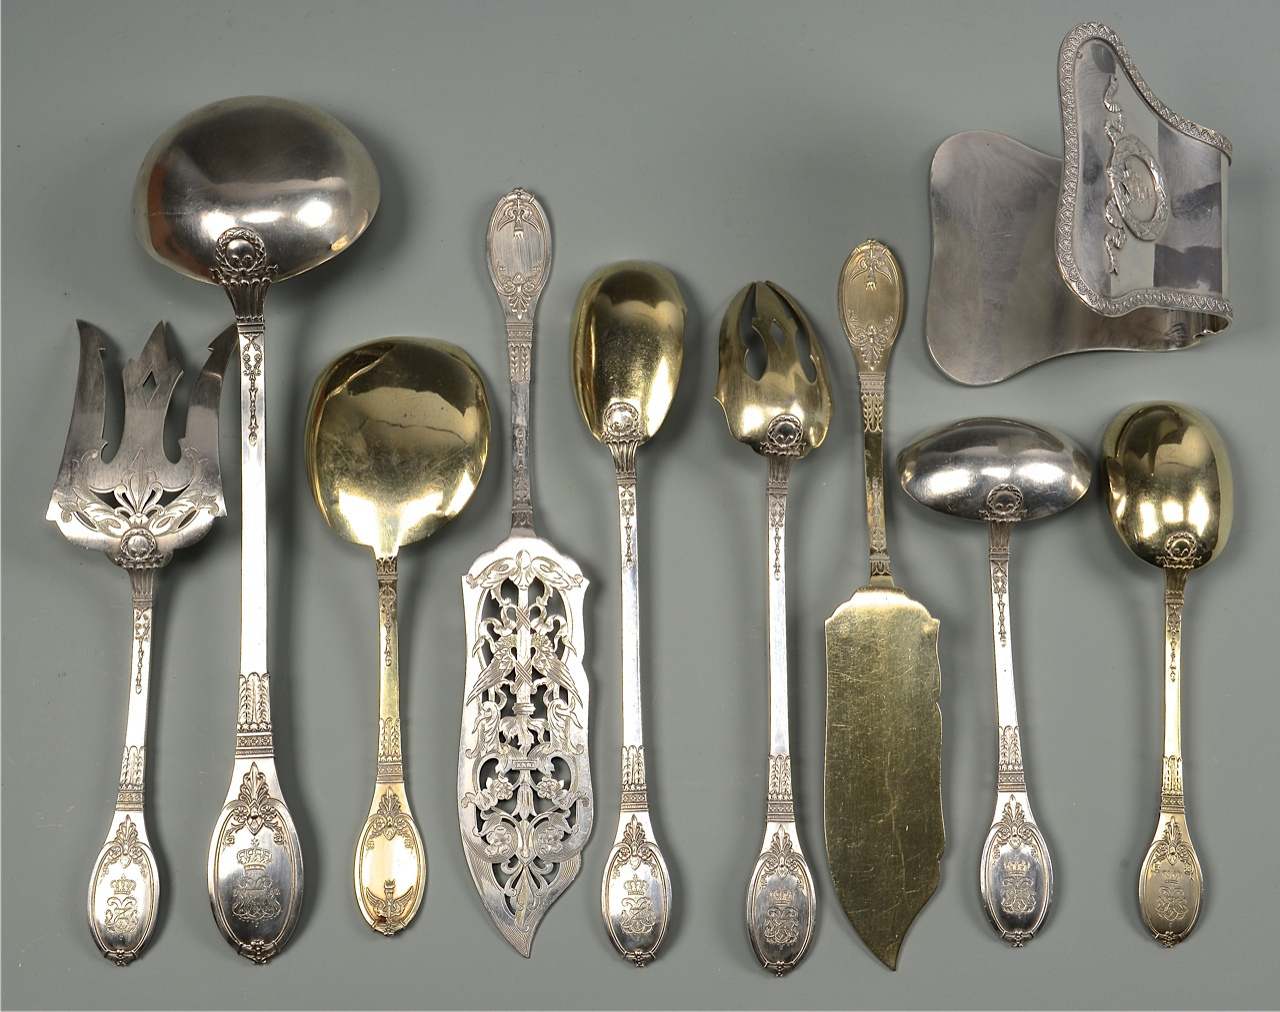 Lot 41: 148 pcs French Silver Flatware with crests